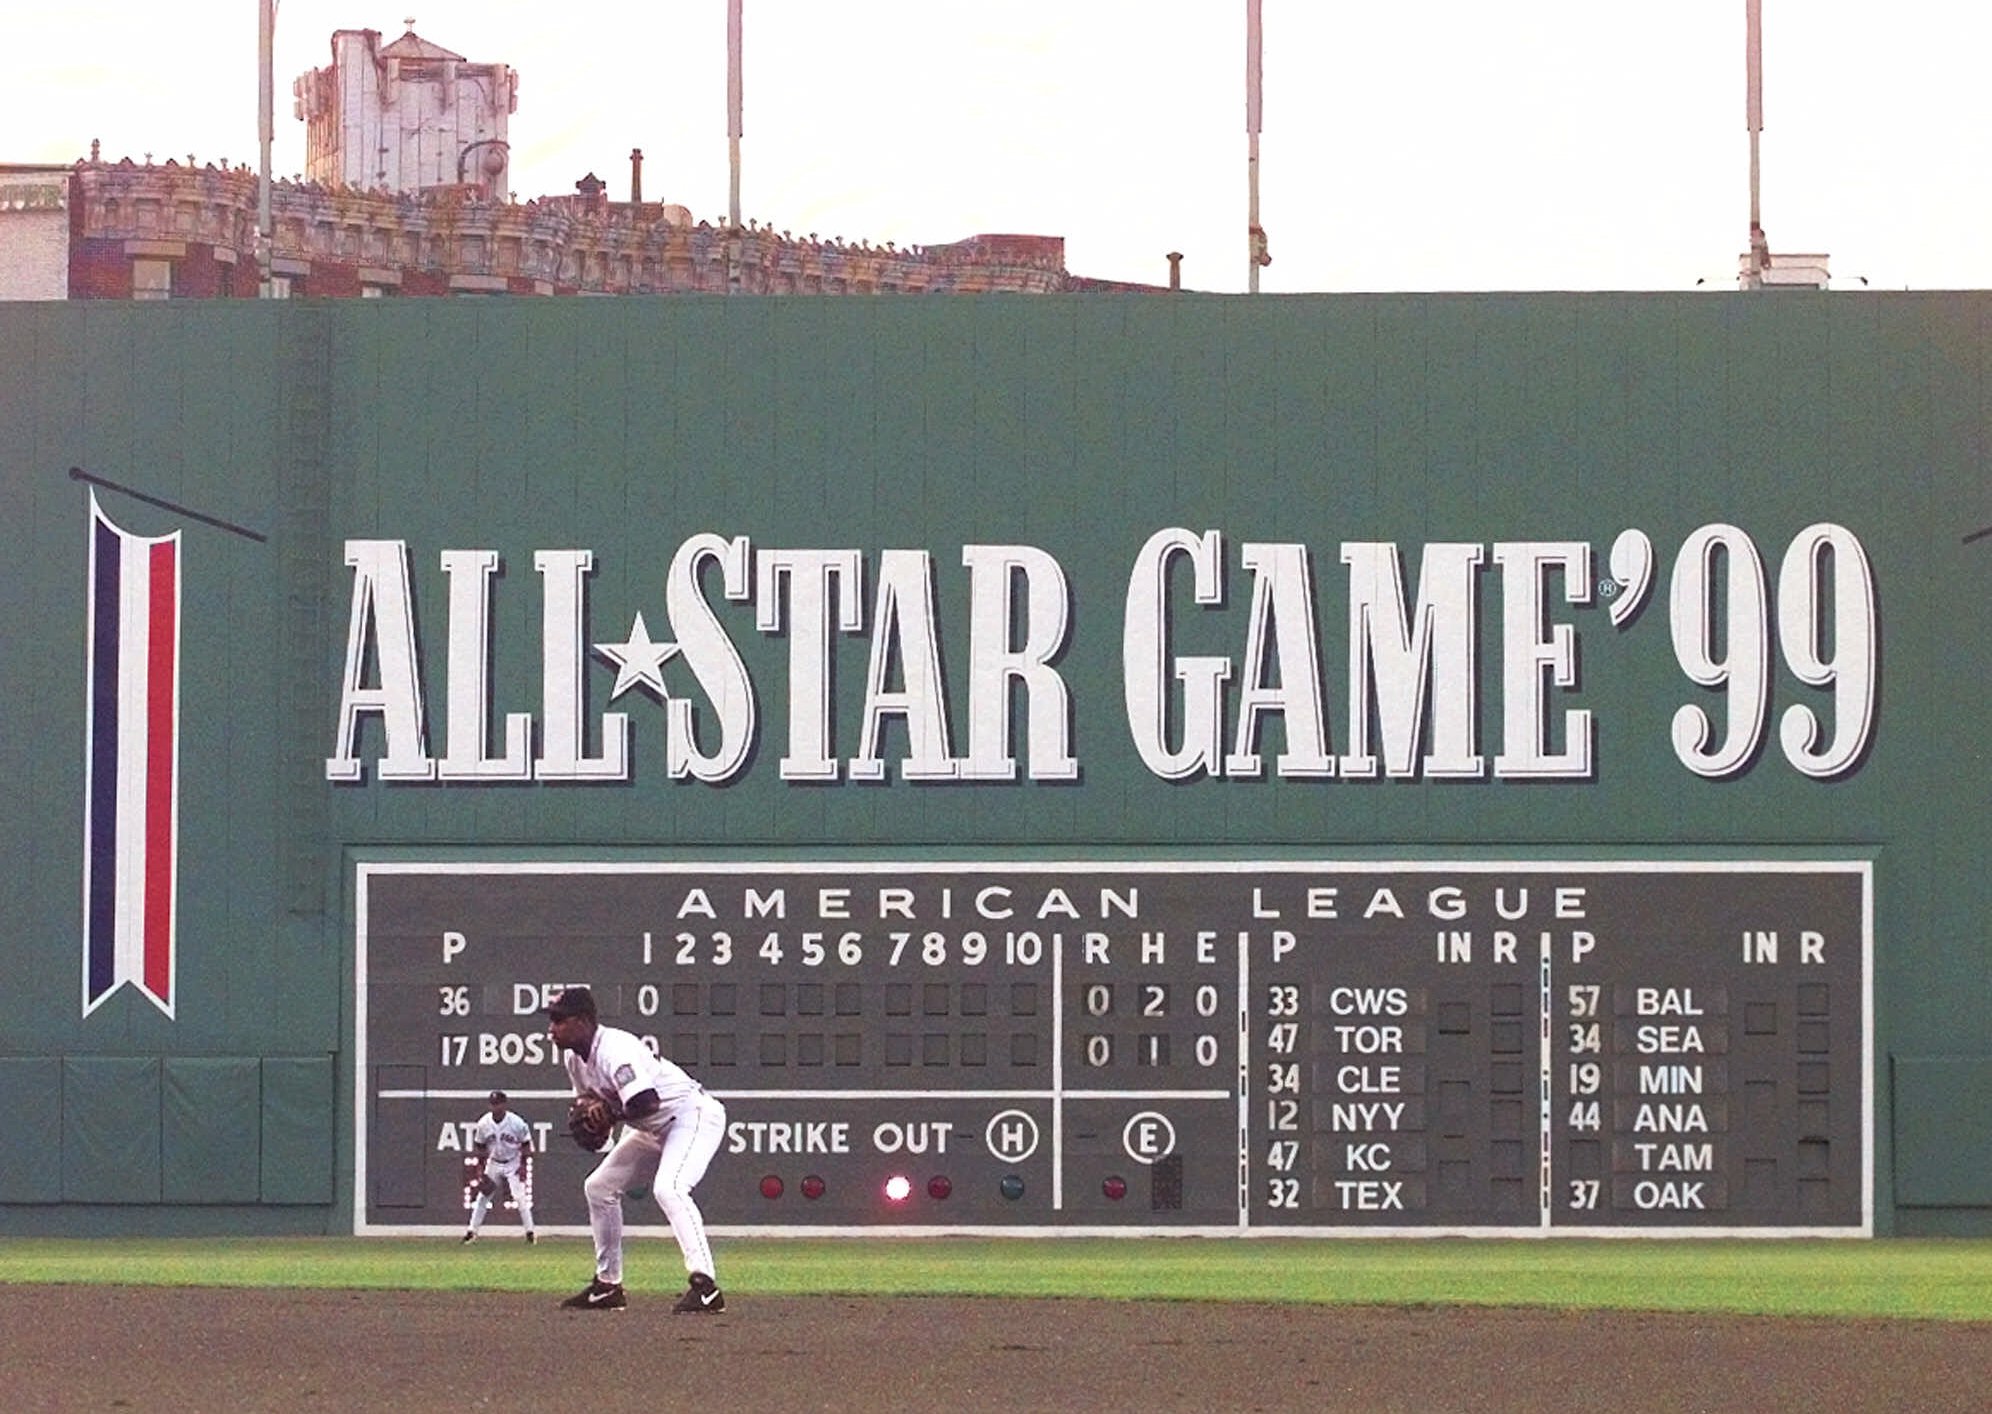 At the 1999 All-Star Game, Fenway Park was the center of the